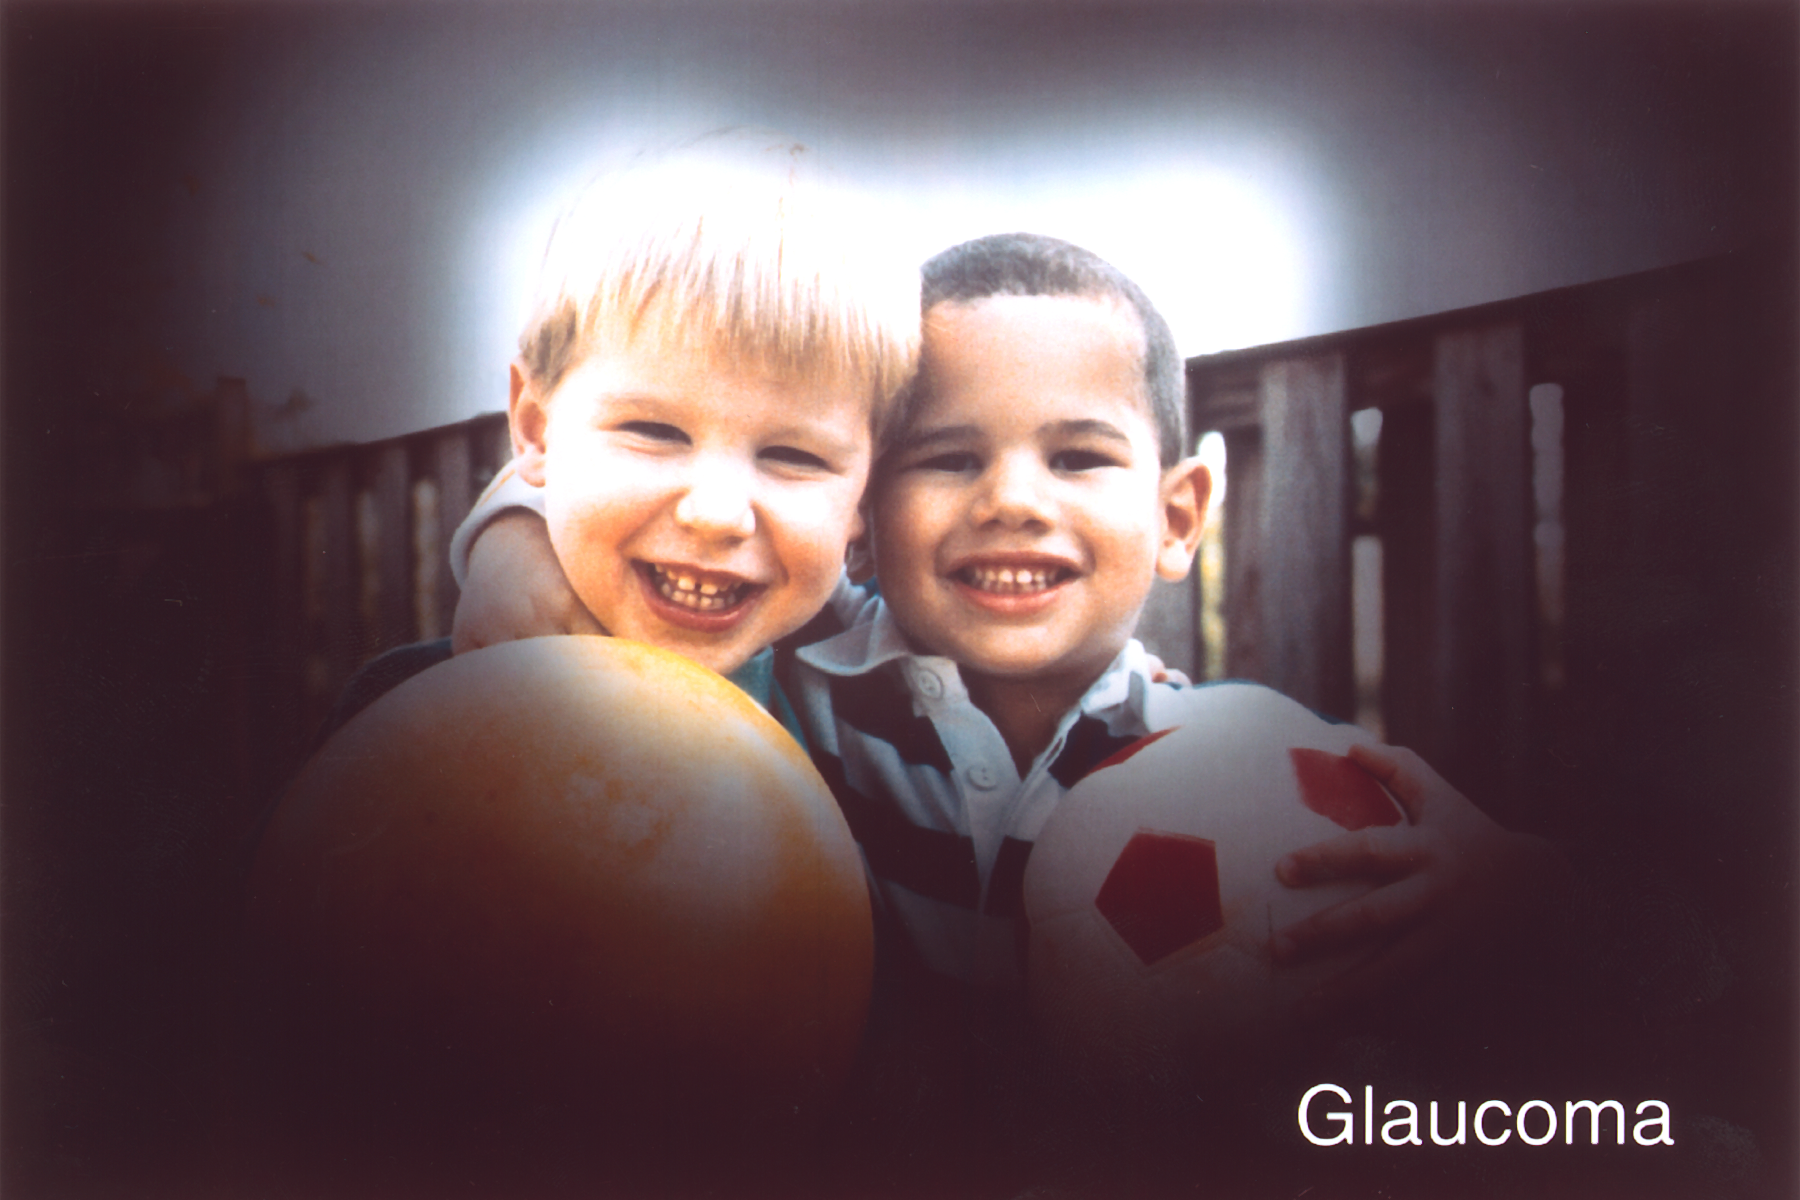 Vision loss caused by glaucoma